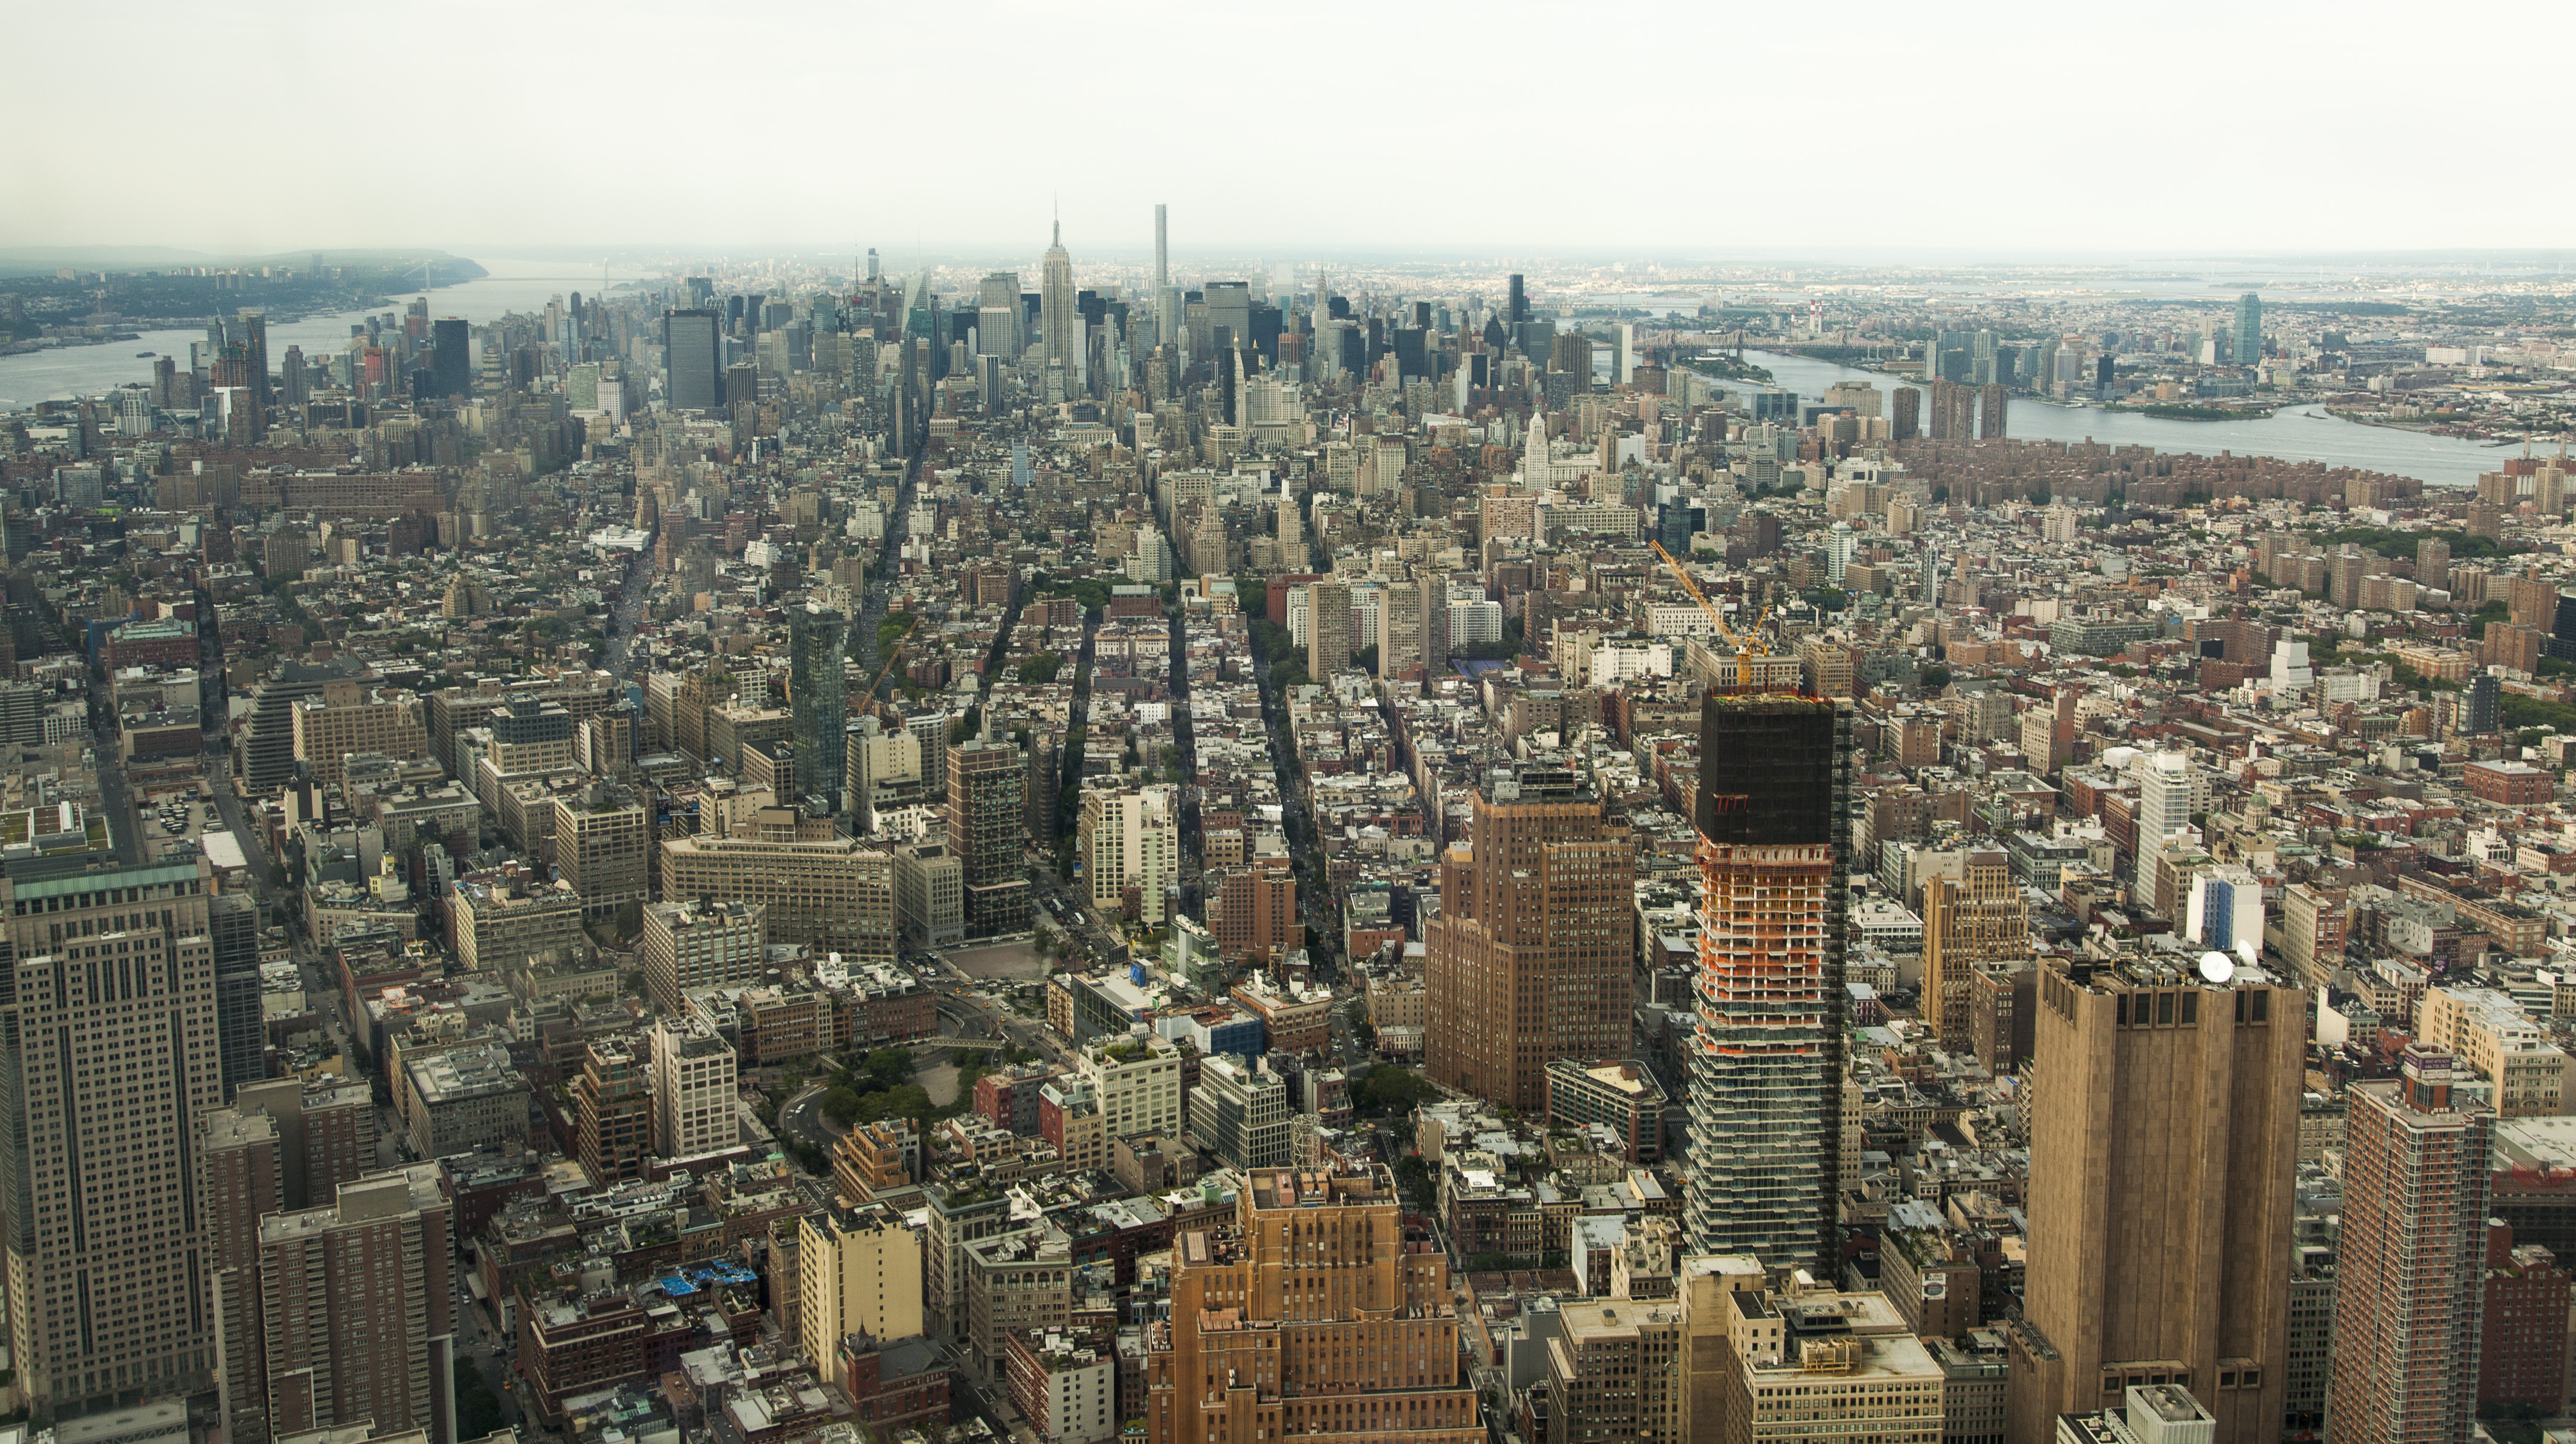 Is new york one of the largest cities in the world was фото 12